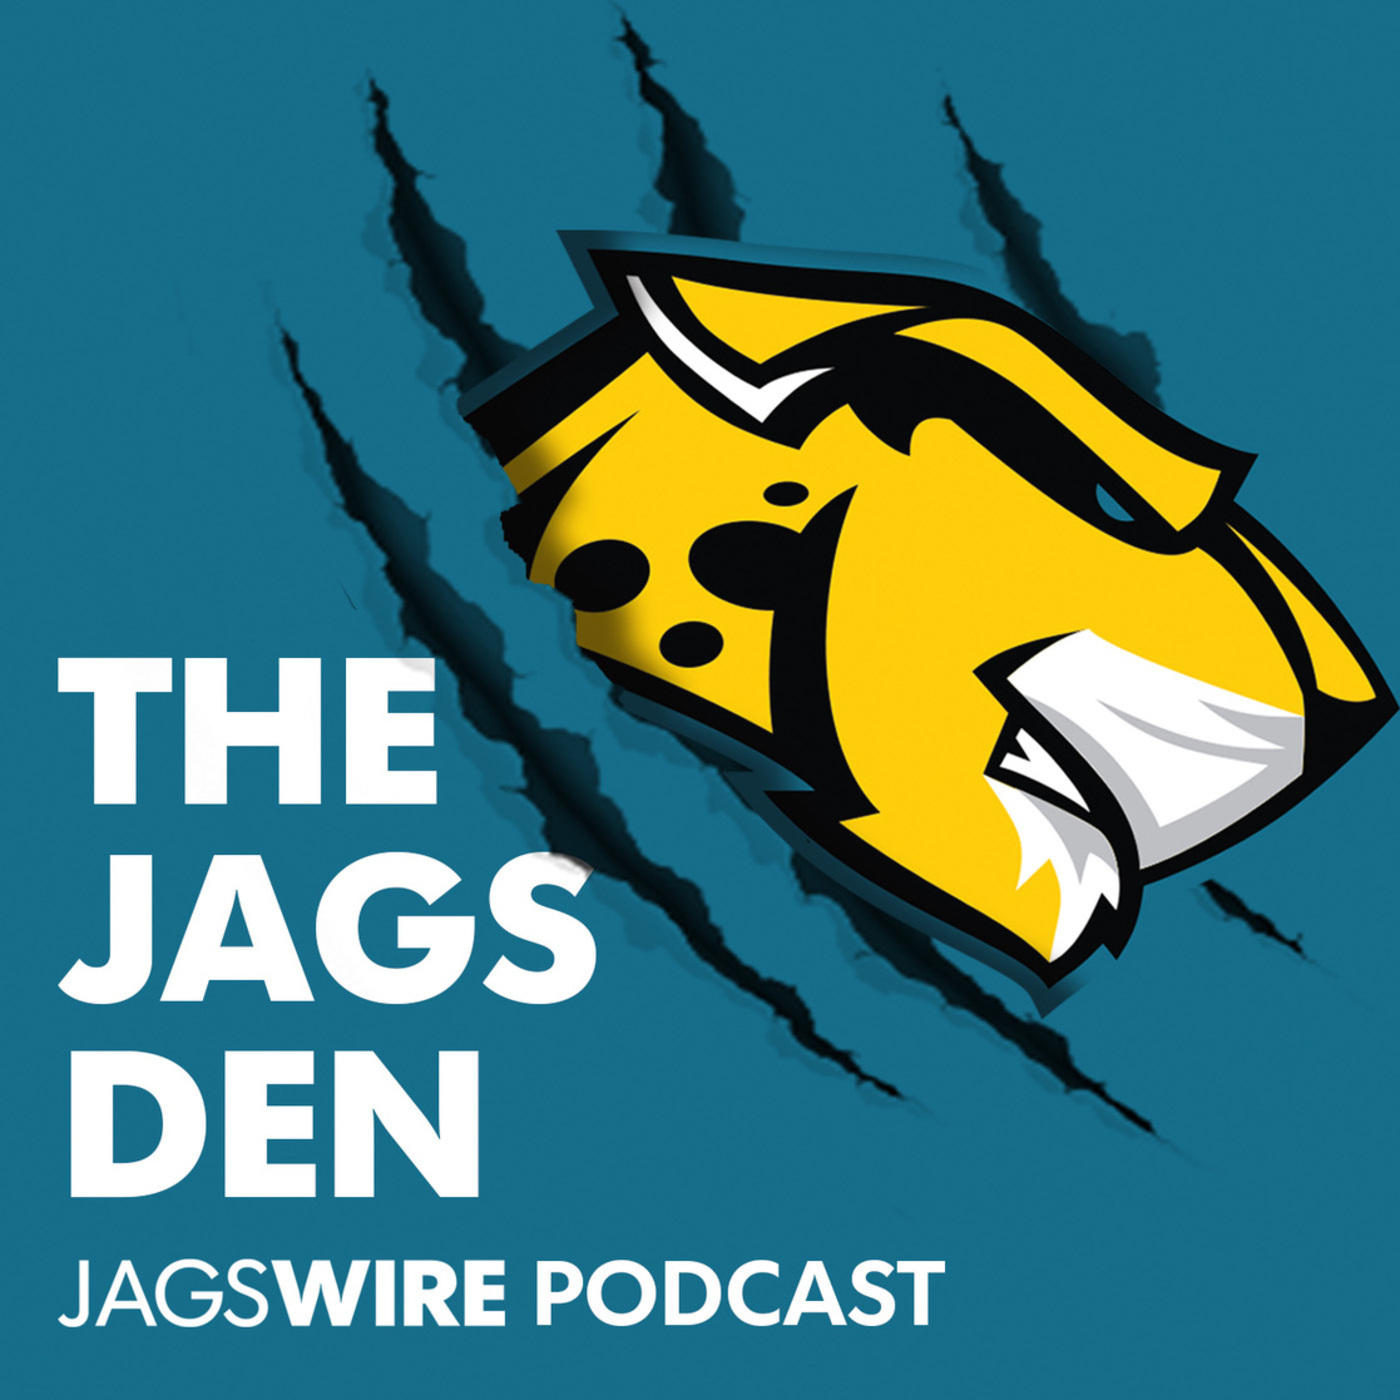 Jags Den Podcast Ep. 43: Optimism for Jags WR corps and Madden ratings 